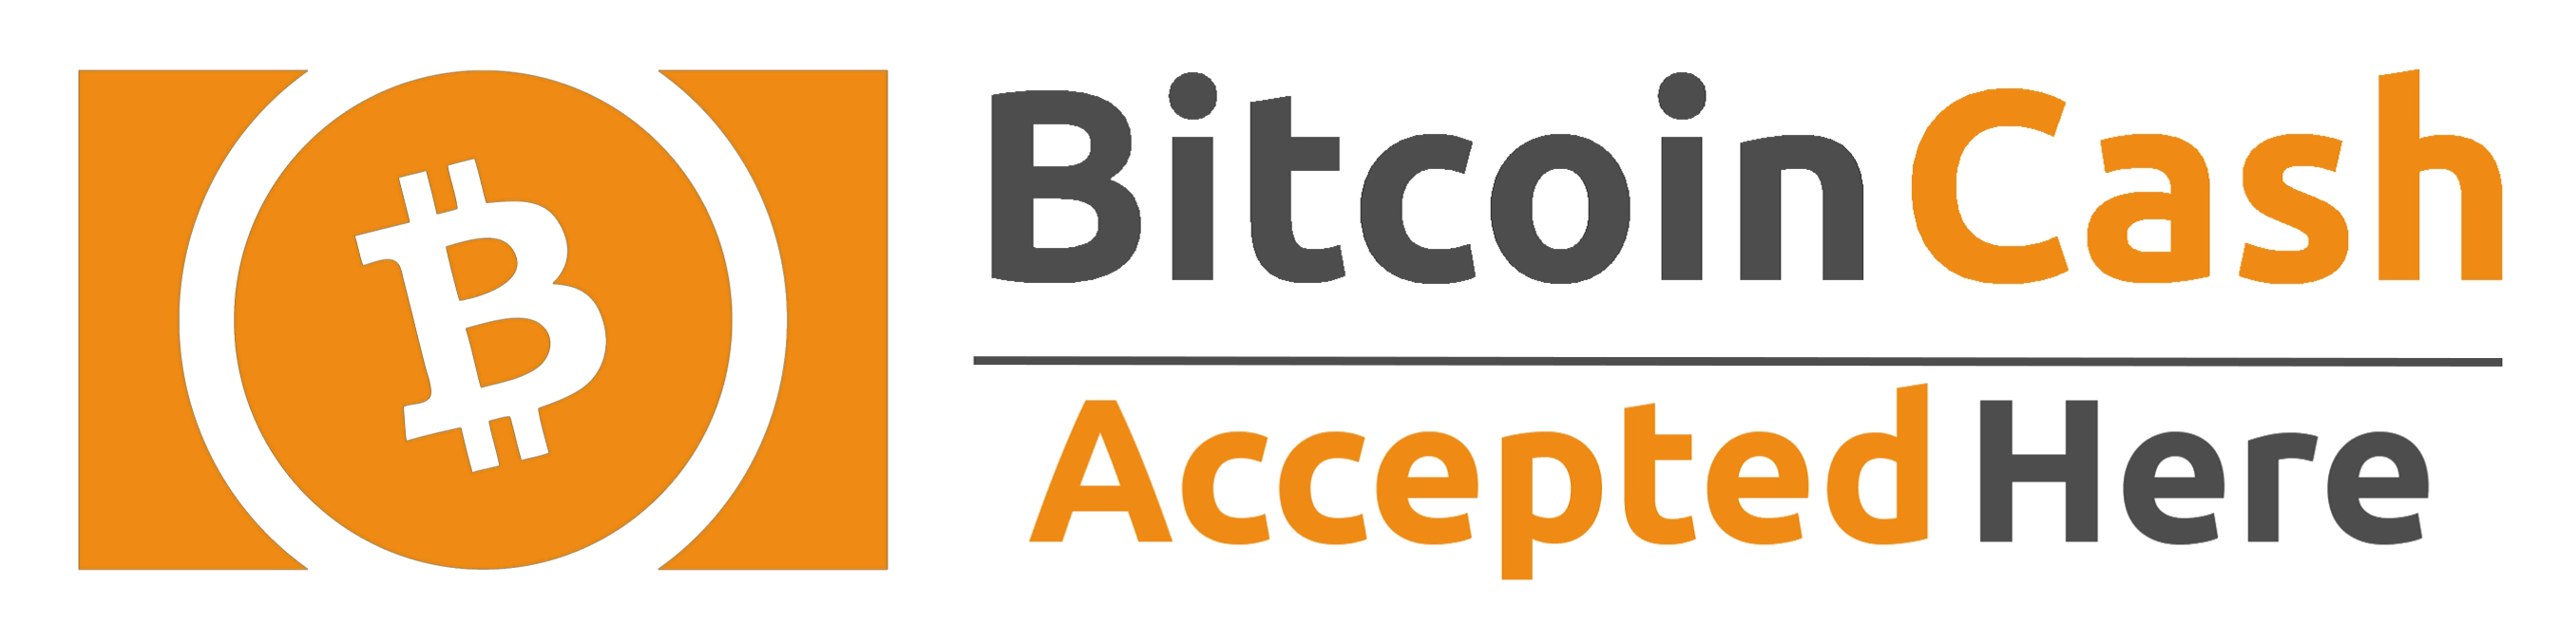 Cash Accepted Logo - I created a new BitcoinCash 'Accepted Here' graphic free to